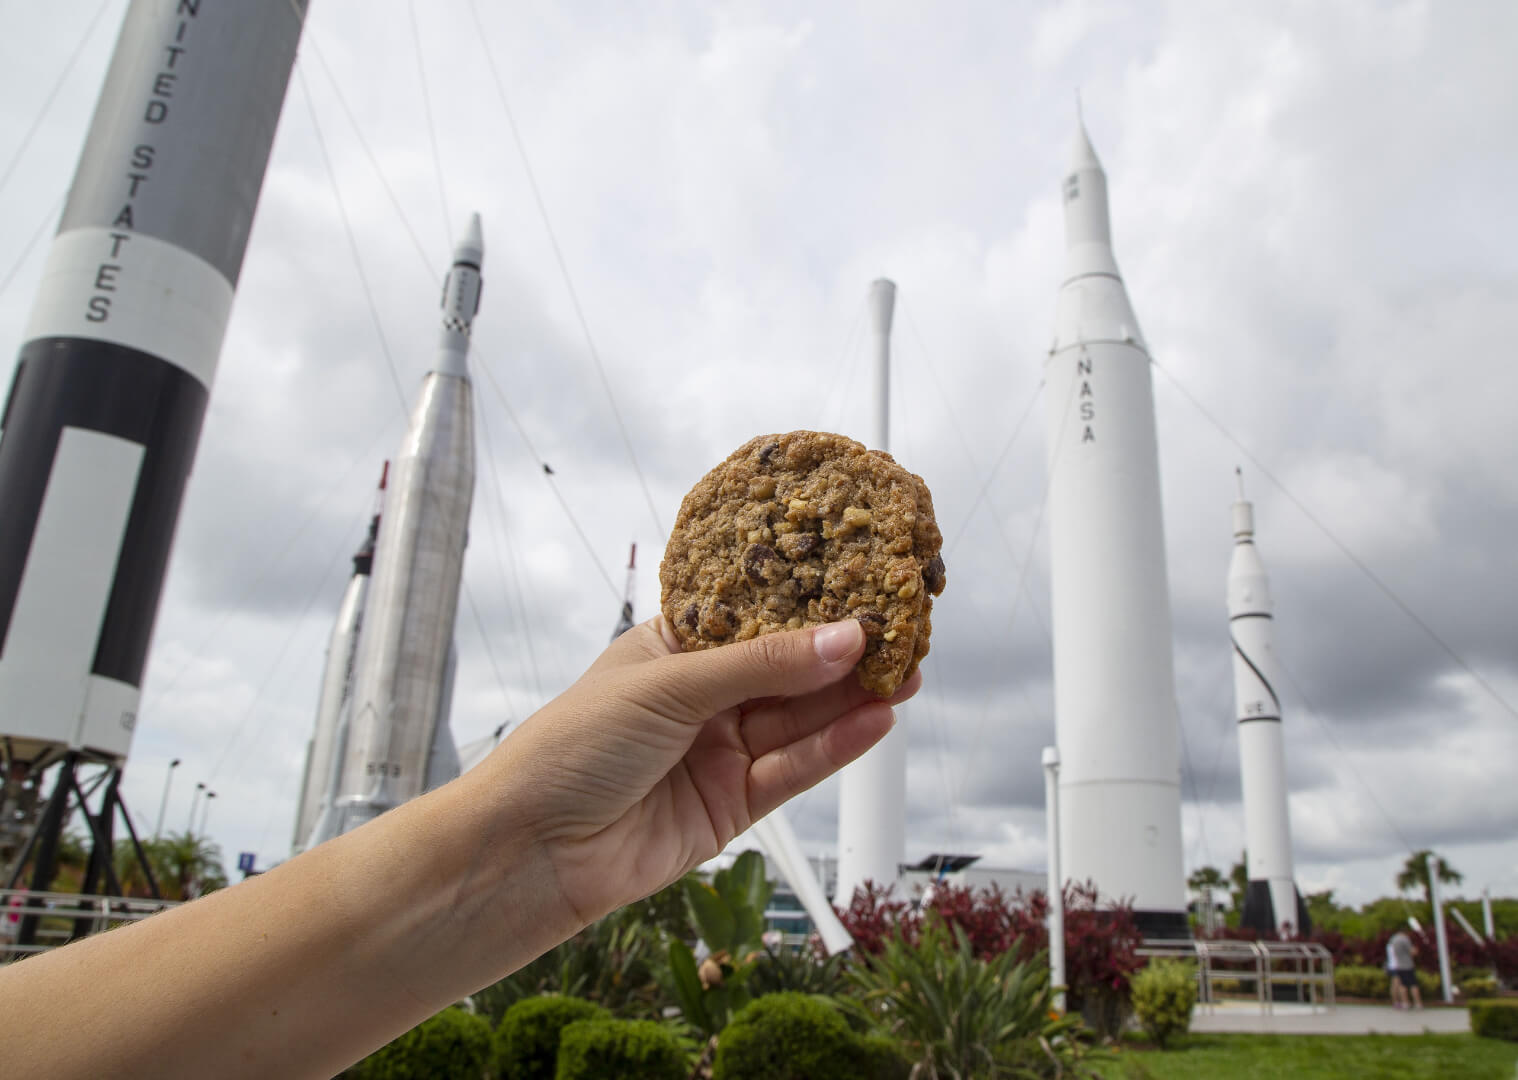 Astronauts look forward to baking chocolate chip cookies on the ISS